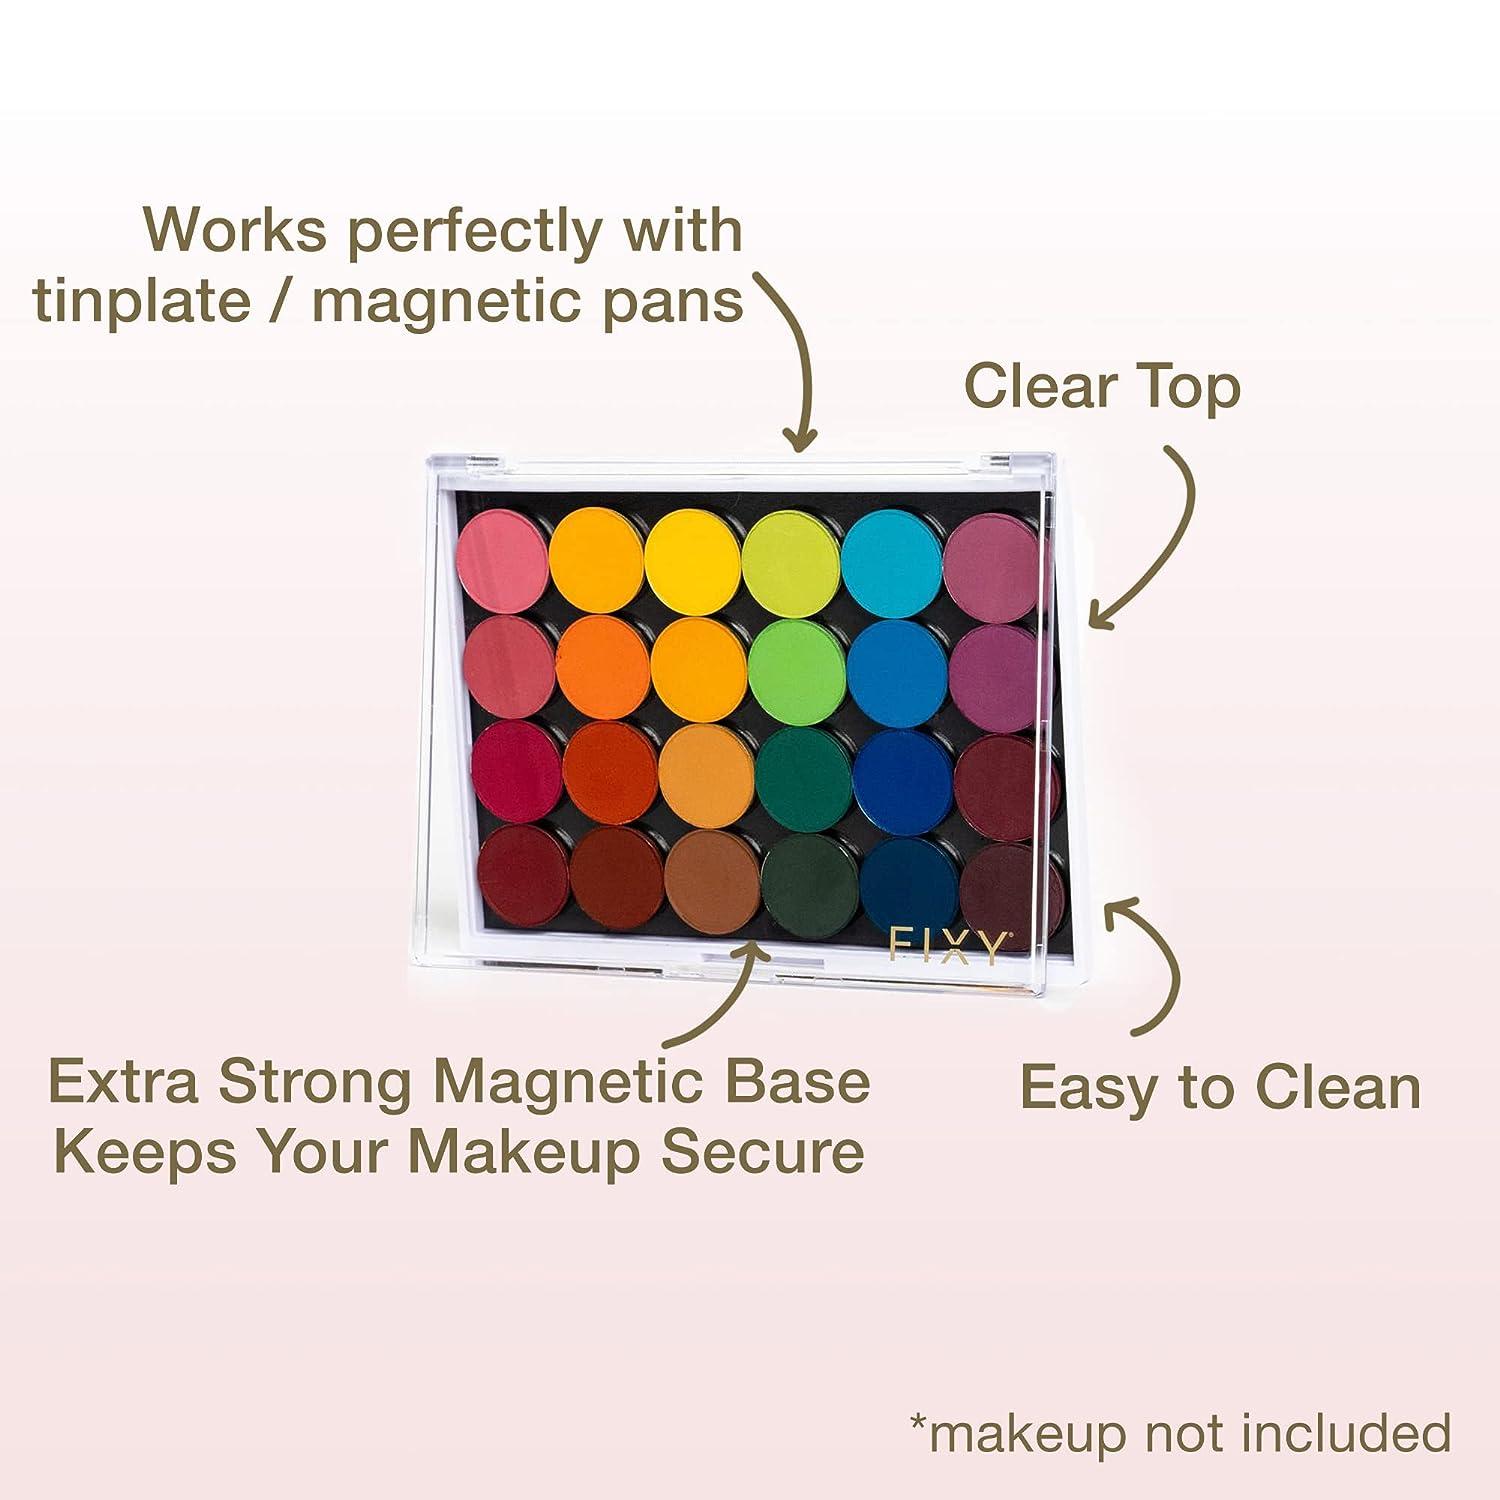 FIXY Empty Magnetic Makeup Palette with Clear Top - Organize, Depot &  Declutter Makeup - Customize Your Own Bronzer, Blush and Eyeshadow Palette  - Travel Makeup Organizer - 5.7x4.3 Medium Palette Medium